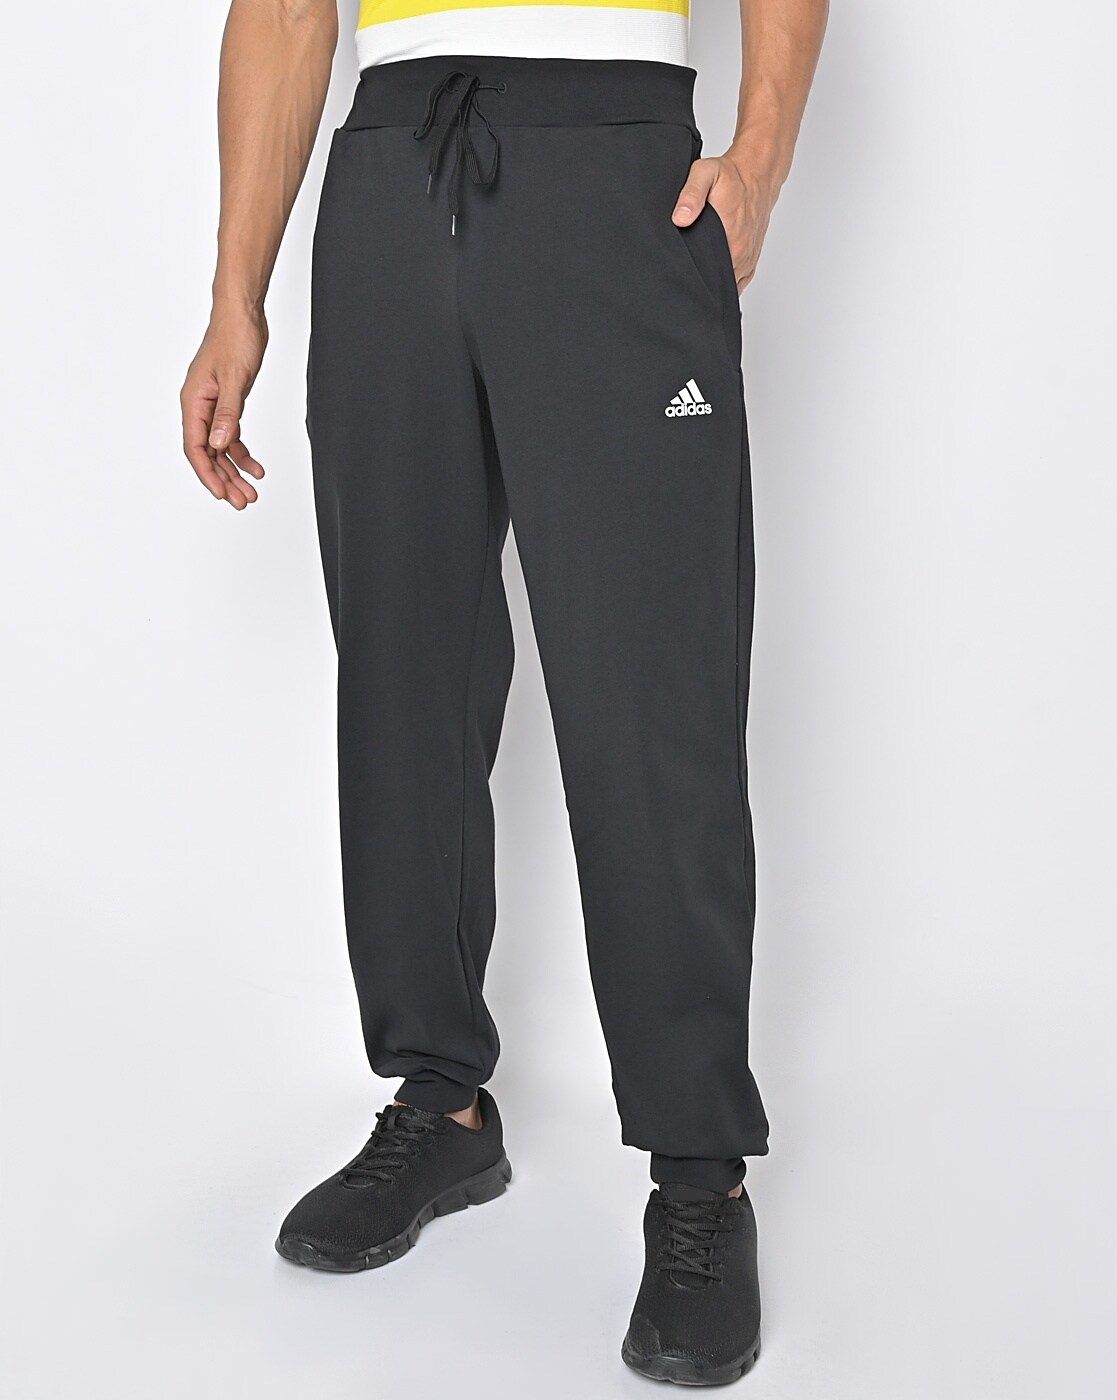 Adidas Y-3 Men's Jogger Pants - Red - Trade Sports